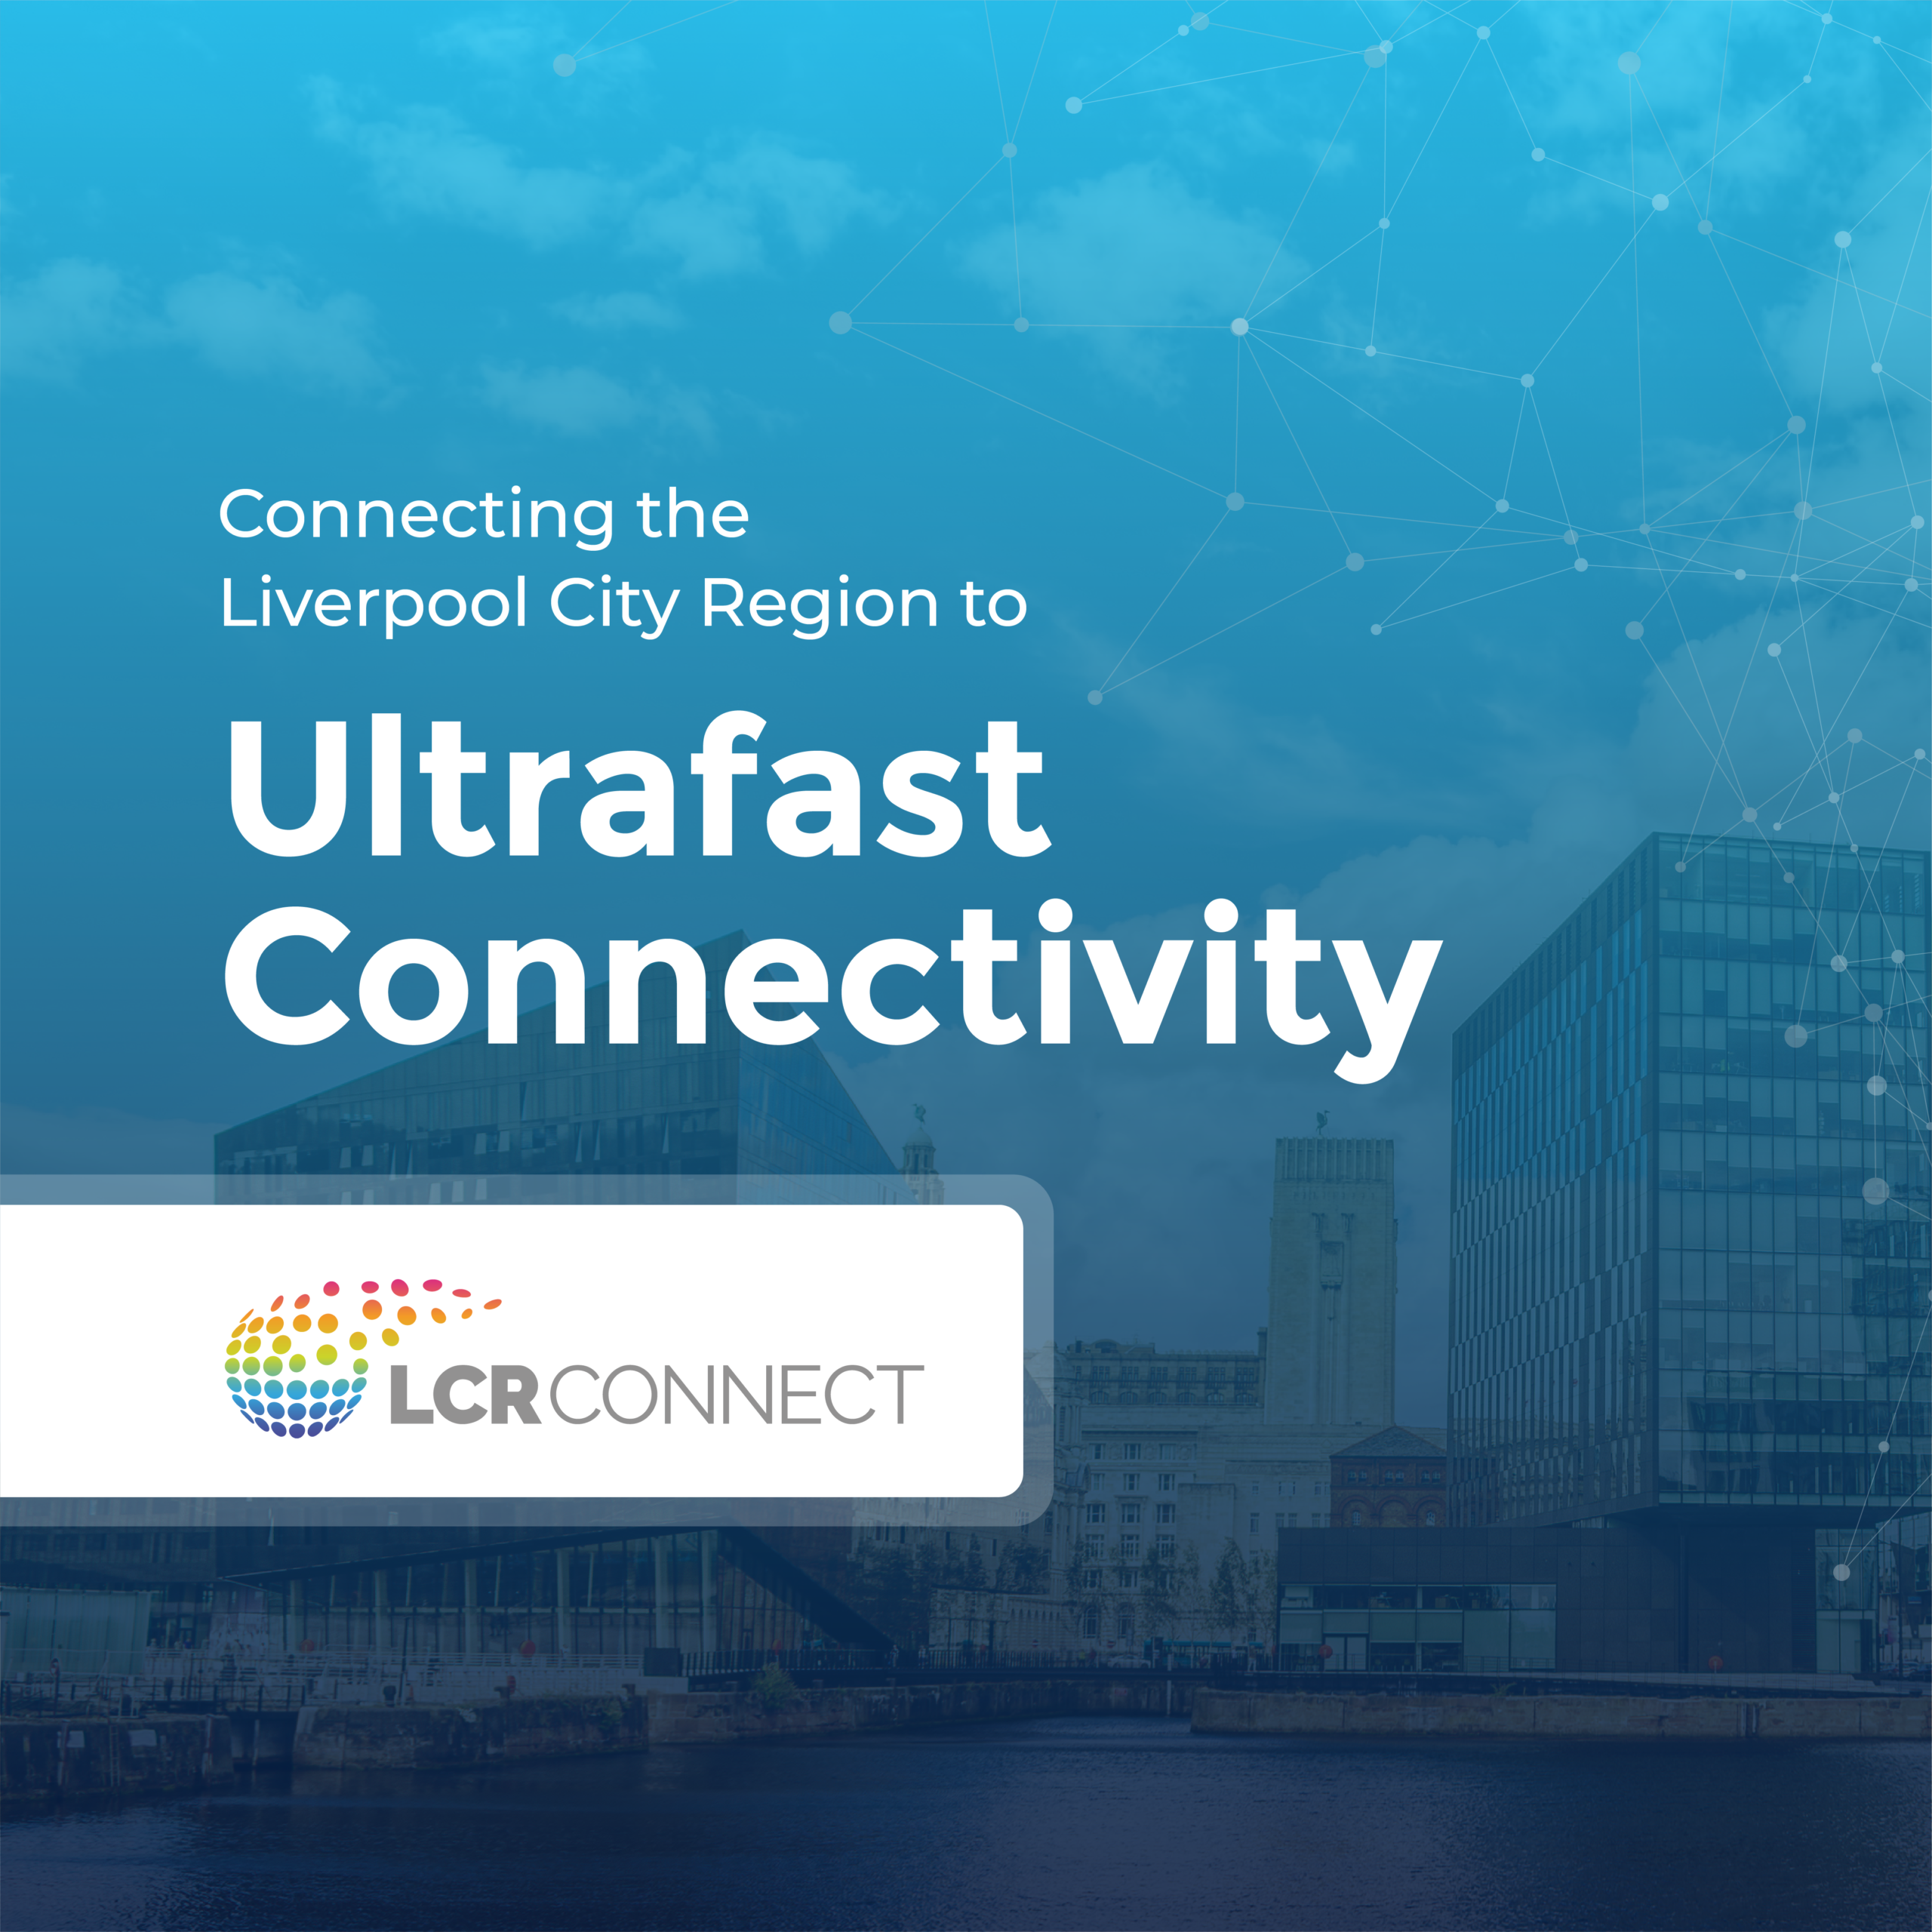 LCR Connect – First Live Areas Announced